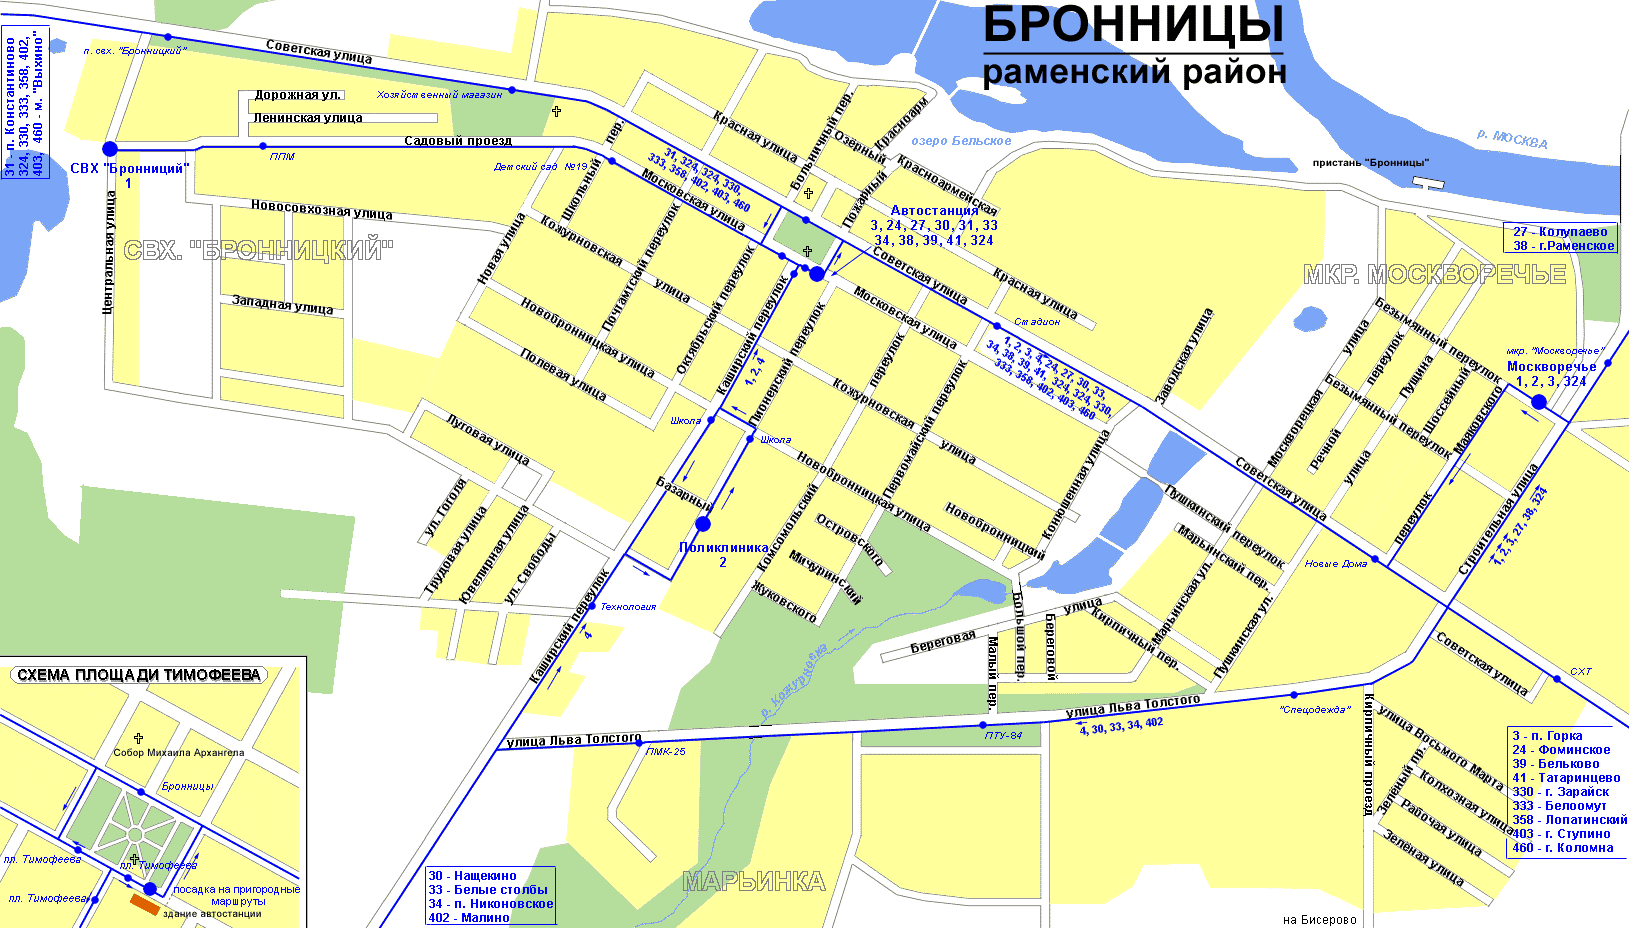 Map of Bronnitsy